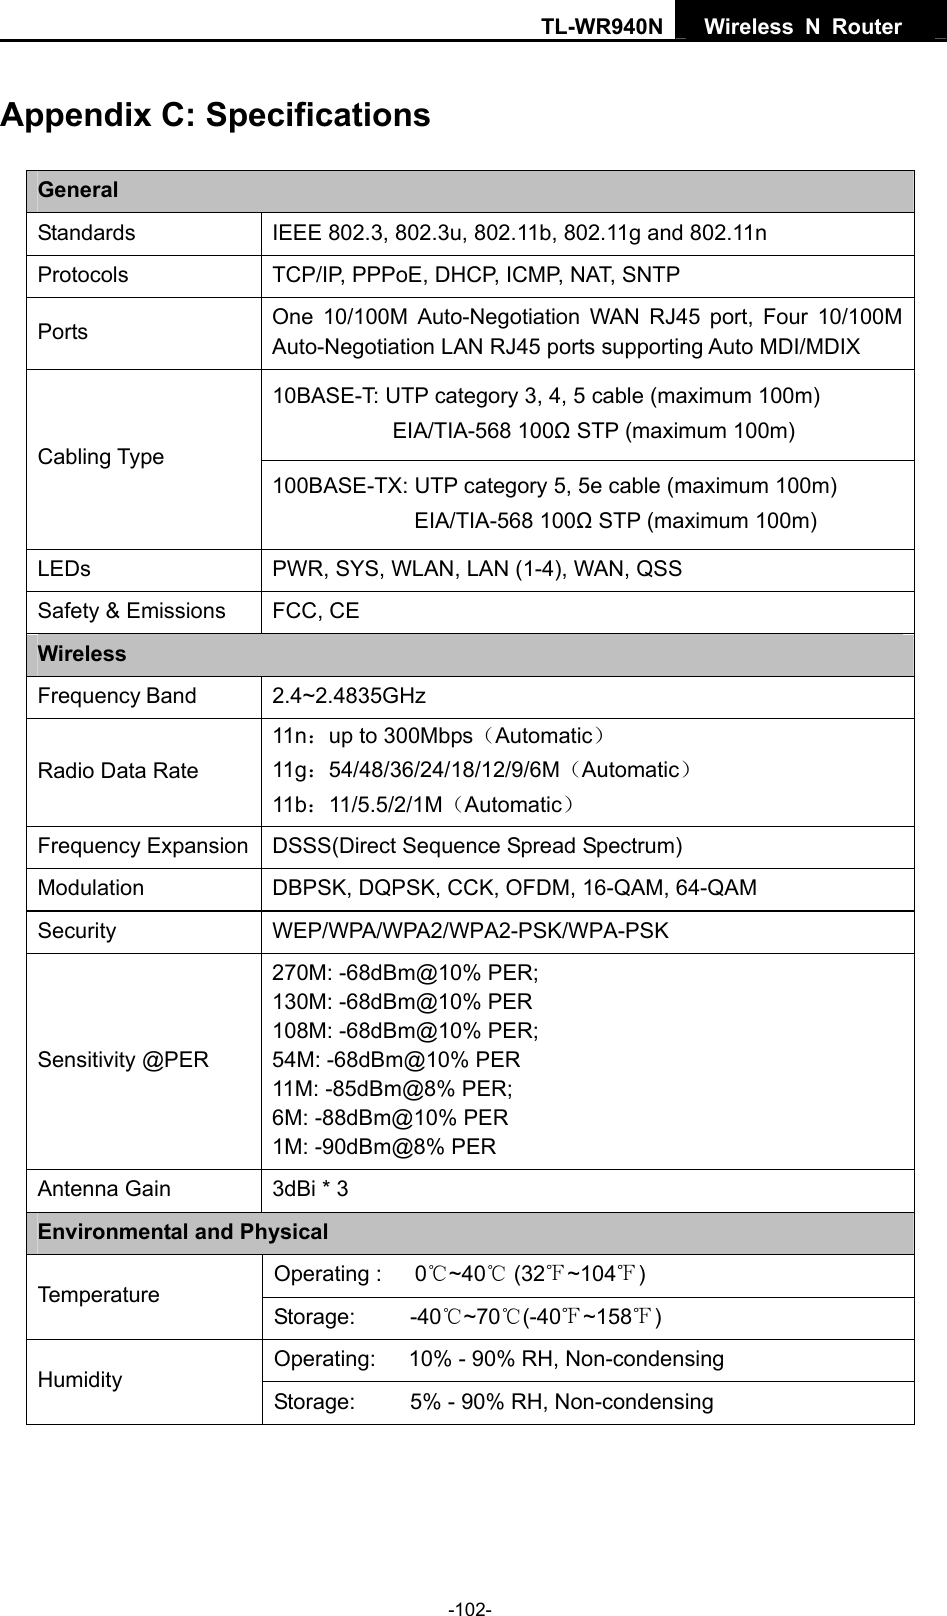 TL-WR940N  Wireless N Router   Appendix C: Specifications General Standards  IEEE 802.3, 802.3u, 802.11b, 802.11g and 802.11n Protocols  TCP/IP, PPPoE, DHCP, ICMP, NAT, SNTP Ports  One 10/100M Auto-Negotiation WAN RJ45 port, Four 10/100M Auto-Negotiation LAN RJ45 ports supporting Auto MDI/MDIX 10BASE-T: UTP category 3, 4, 5 cable (maximum 100m) EIA/TIA-568 100Ω STP (maximum 100m) Cabling Type 100BASE-TX: UTP category 5, 5e cable (maximum 100m) EIA/TIA-568 100Ω STP (maximum 100m) LEDs  PWR, SYS, WLAN, LAN (1-4), WAN, QSS Safety &amp; Emissions  FCC, CE Wireless Frequency Band 2.4~2.4835GHz Radio Data Rate 11n：up to 300Mbps（Automatic） 11g：54/48/36/24/18/12/9/6M（Automatic） 11b：11/5.5/2/1M（Automatic） Frequency Expansion  DSSS(Direct Sequence Spread Spectrum) Modulation  DBPSK, DQPSK, CCK, OFDM, 16-QAM, 64-QAM Security WEP/WPA/WPA2/WPA2-PSK/WPA-PSK Sensitivity @PER 270M: -68dBm@10% PER; 130M: -68dBm@10% PER 108M: -68dBm@10% PER;   54M: -68dBm@10% PER 11M: -85dBm@8% PER;   6M: -88dBm@10% PER 1M: -90dBm@8% PER Antenna Gain  3dBi * 3   Environmental and Physical Operating :   0℃~40℃ (32 ~104℉℉) Temperature  Storage:     -40℃~70℃(-40℉~158℉) Operating:      10% - 90% RH, Non-condensing Humidity  Storage:          5% - 90% RH, Non-condensing -102- 